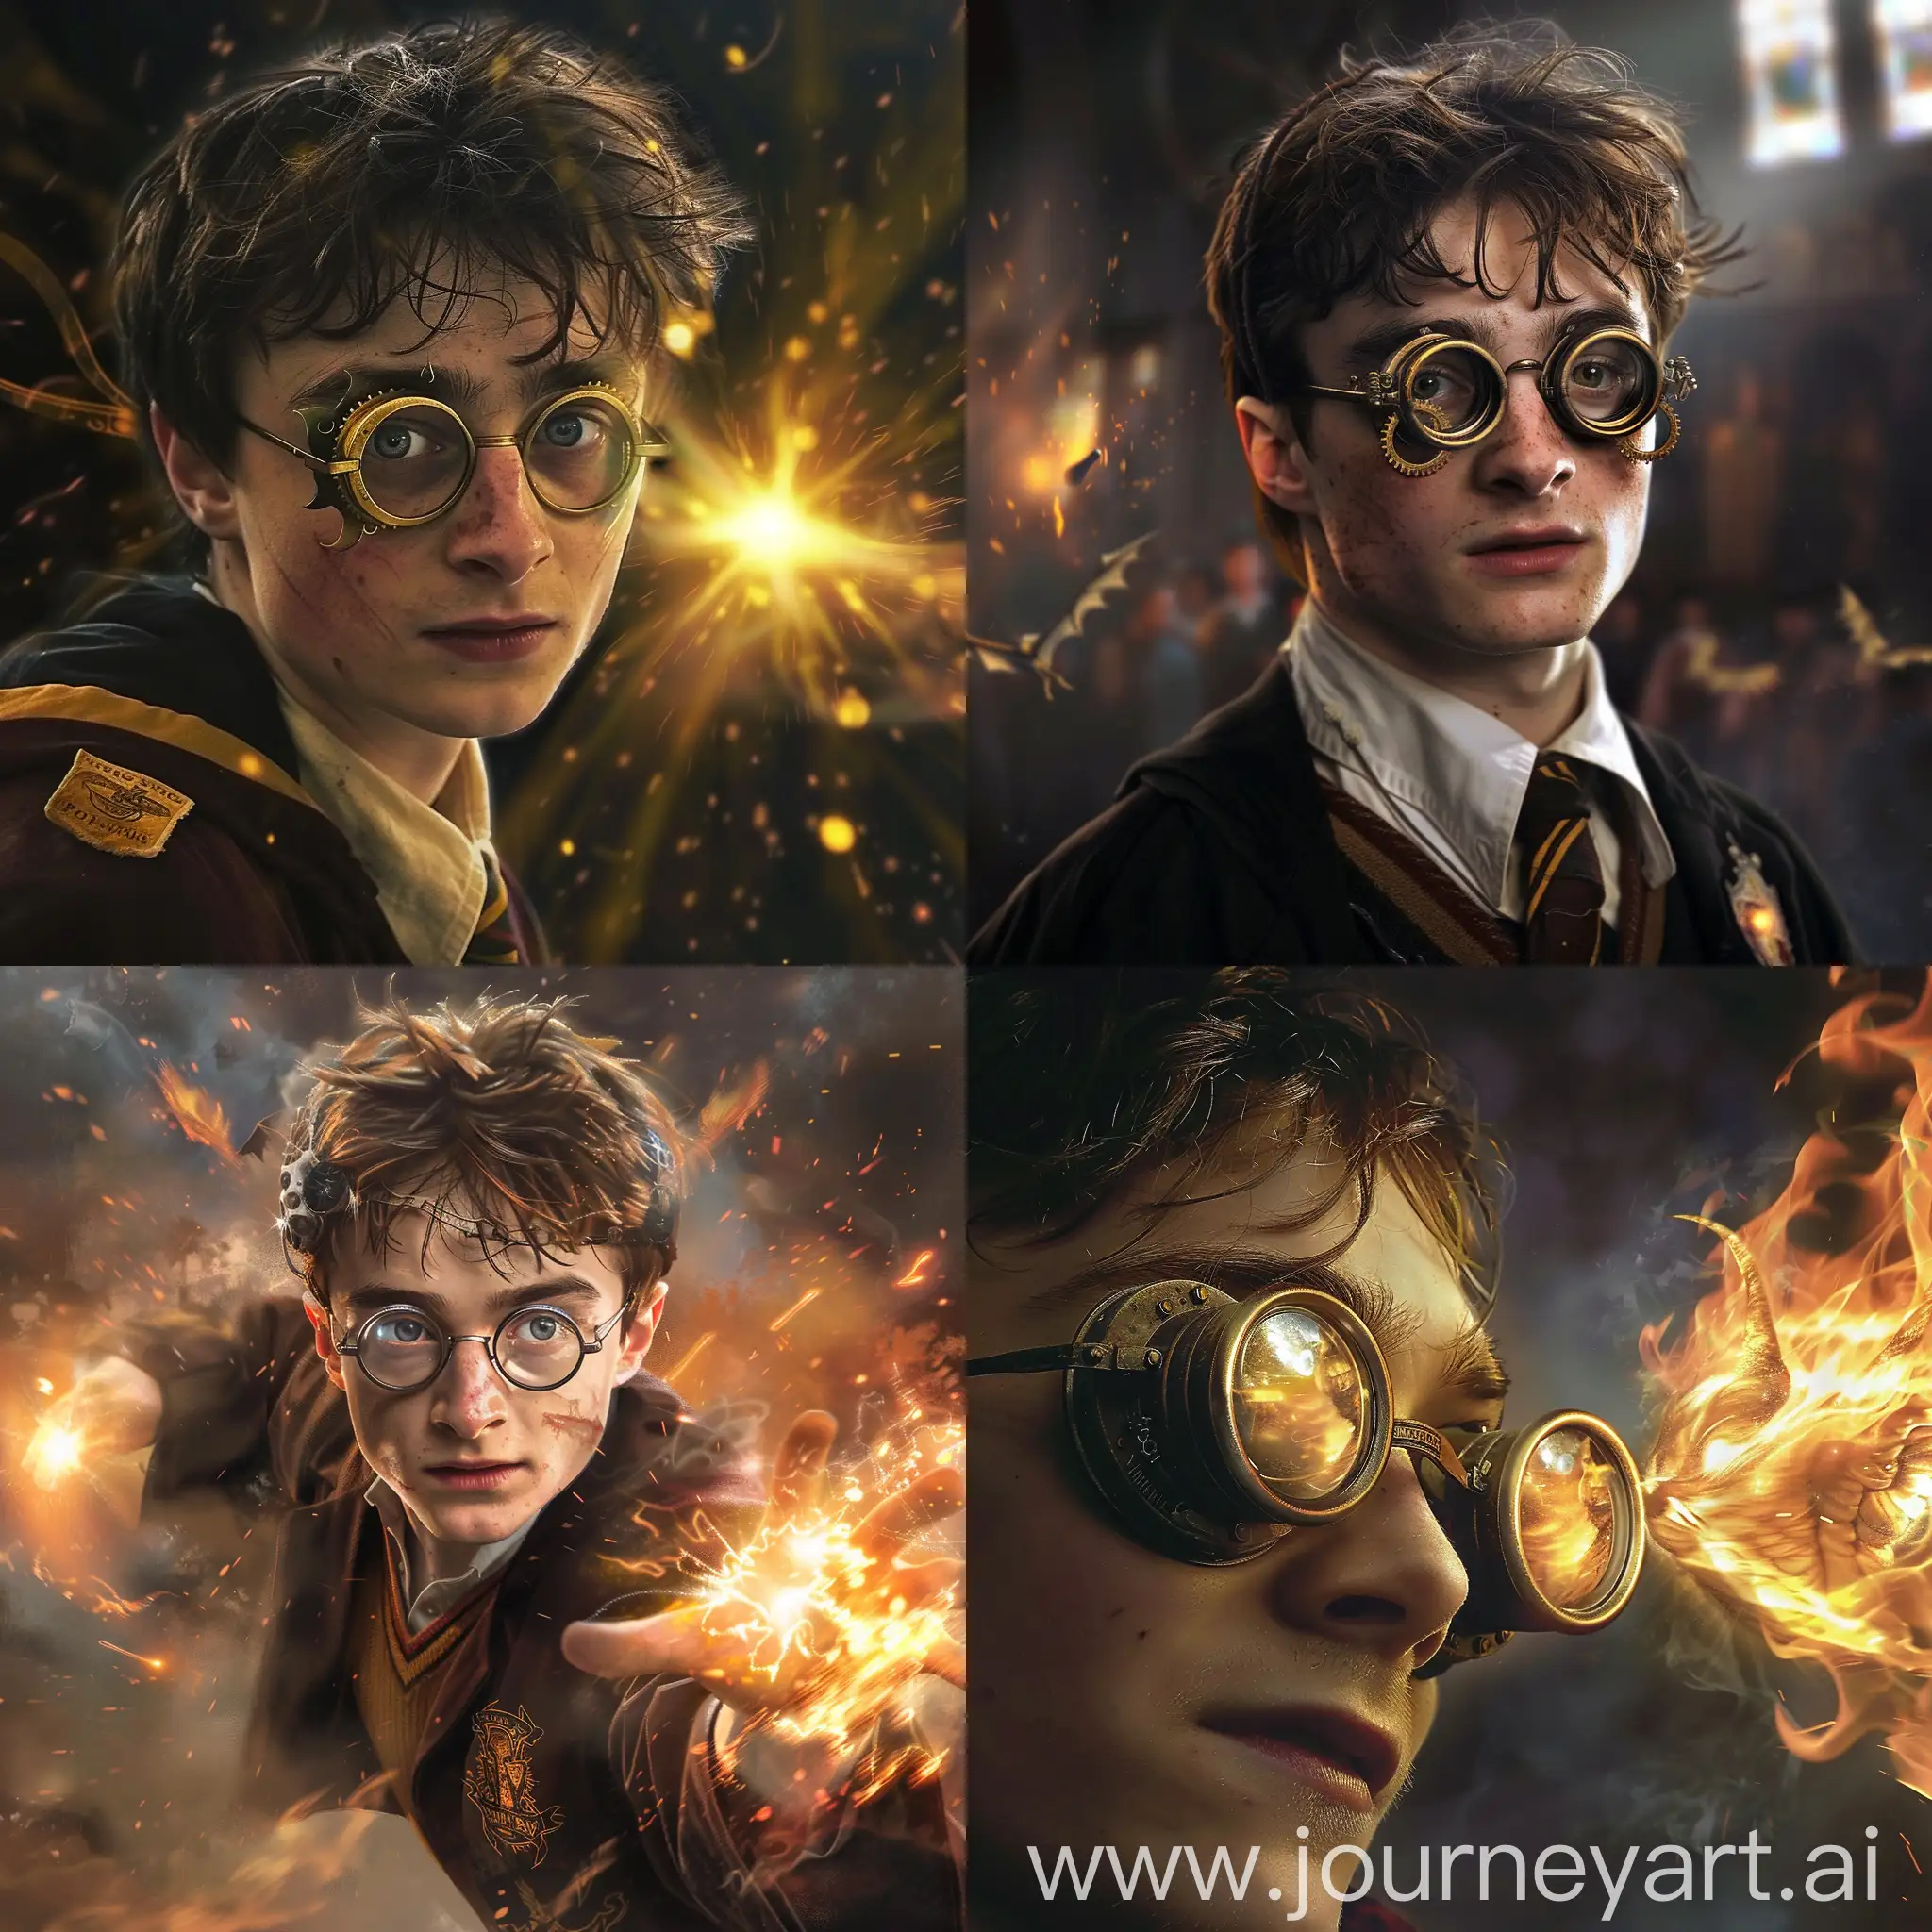 Harry-Potter-Character-Summoning-Patronus-Spell-in-Steampunk-Quidditch-Arena